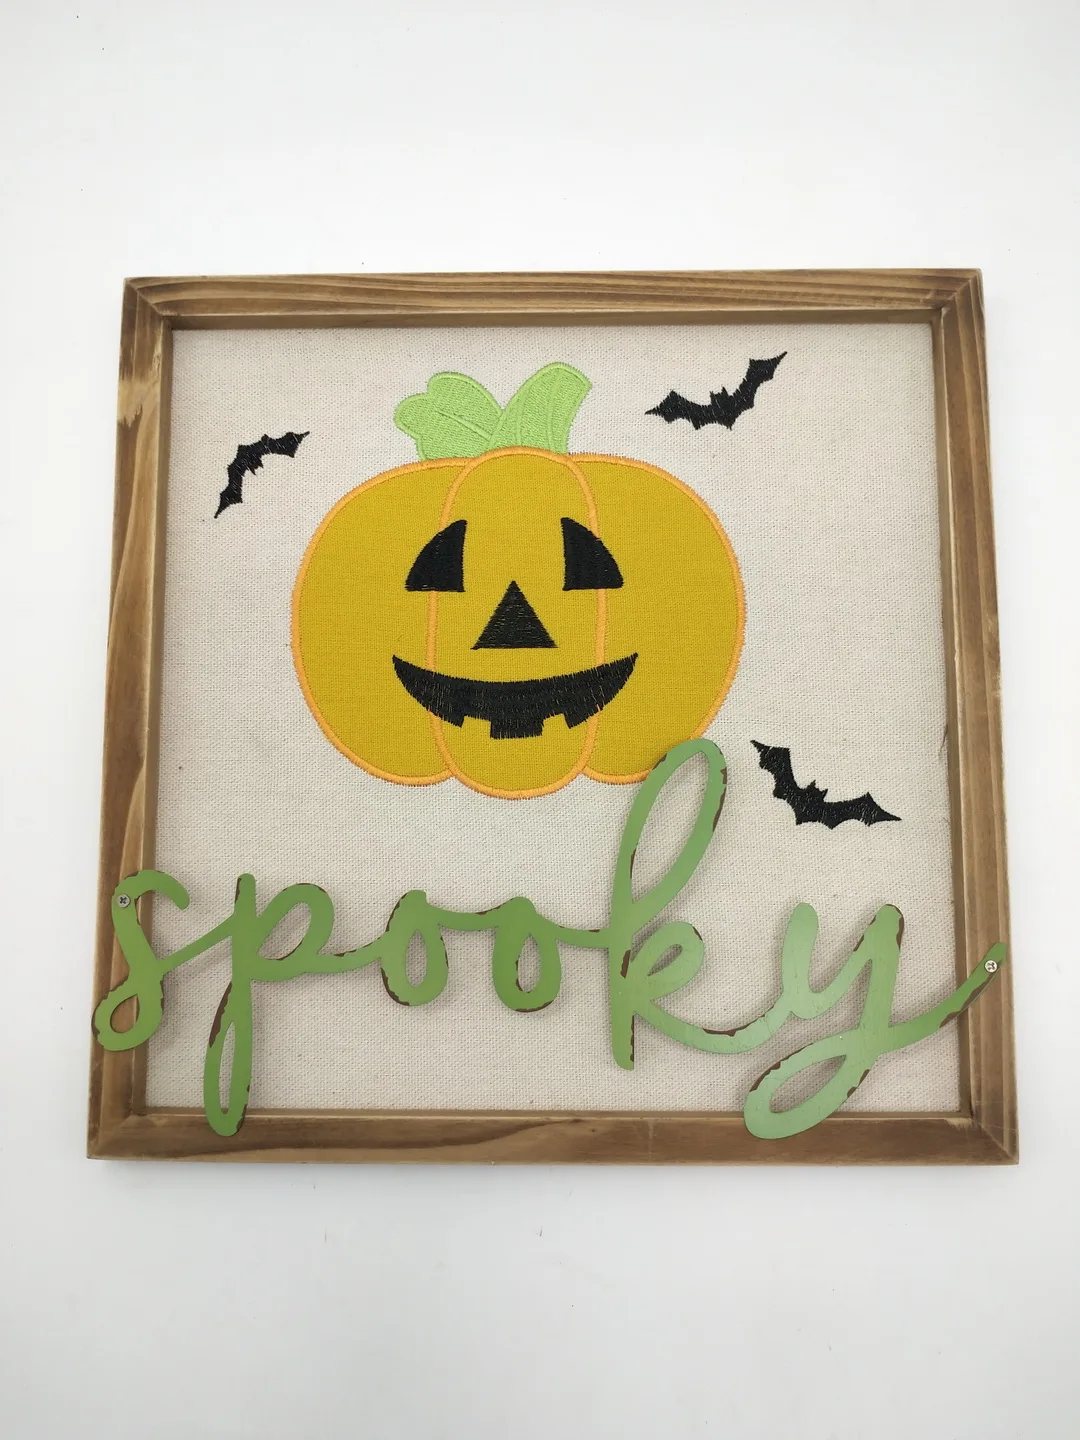 Halloween Decoration Wall Square Spooky Pumpkin Wooden Sign Decor For Halloween Party Dinner Coffee Table Buy Wooden Sign For Halloween Party Pumpkin Wooden Sign Pumpkin Wooden Sign Decor Product On Alibaba Com